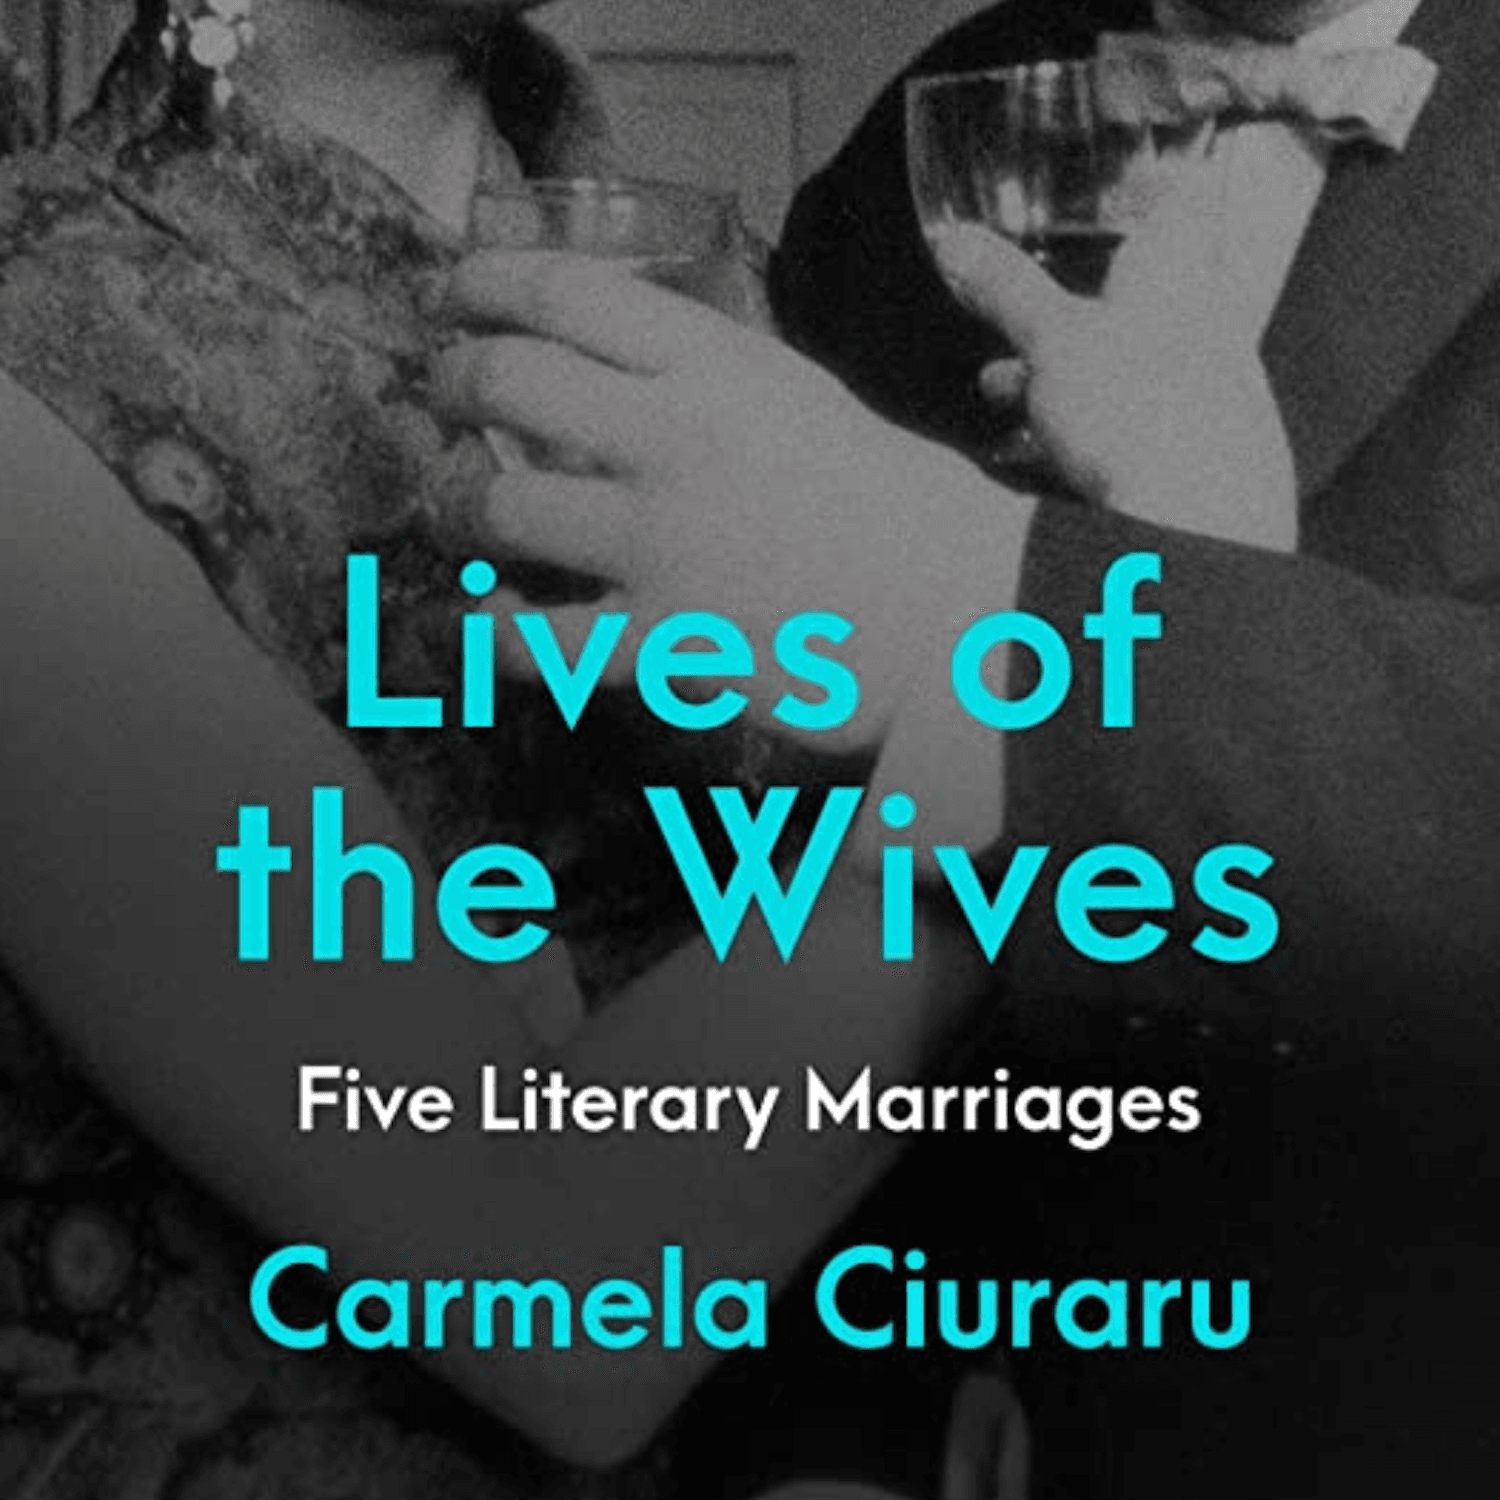 Thumbnail for "Lives of the Wives ".